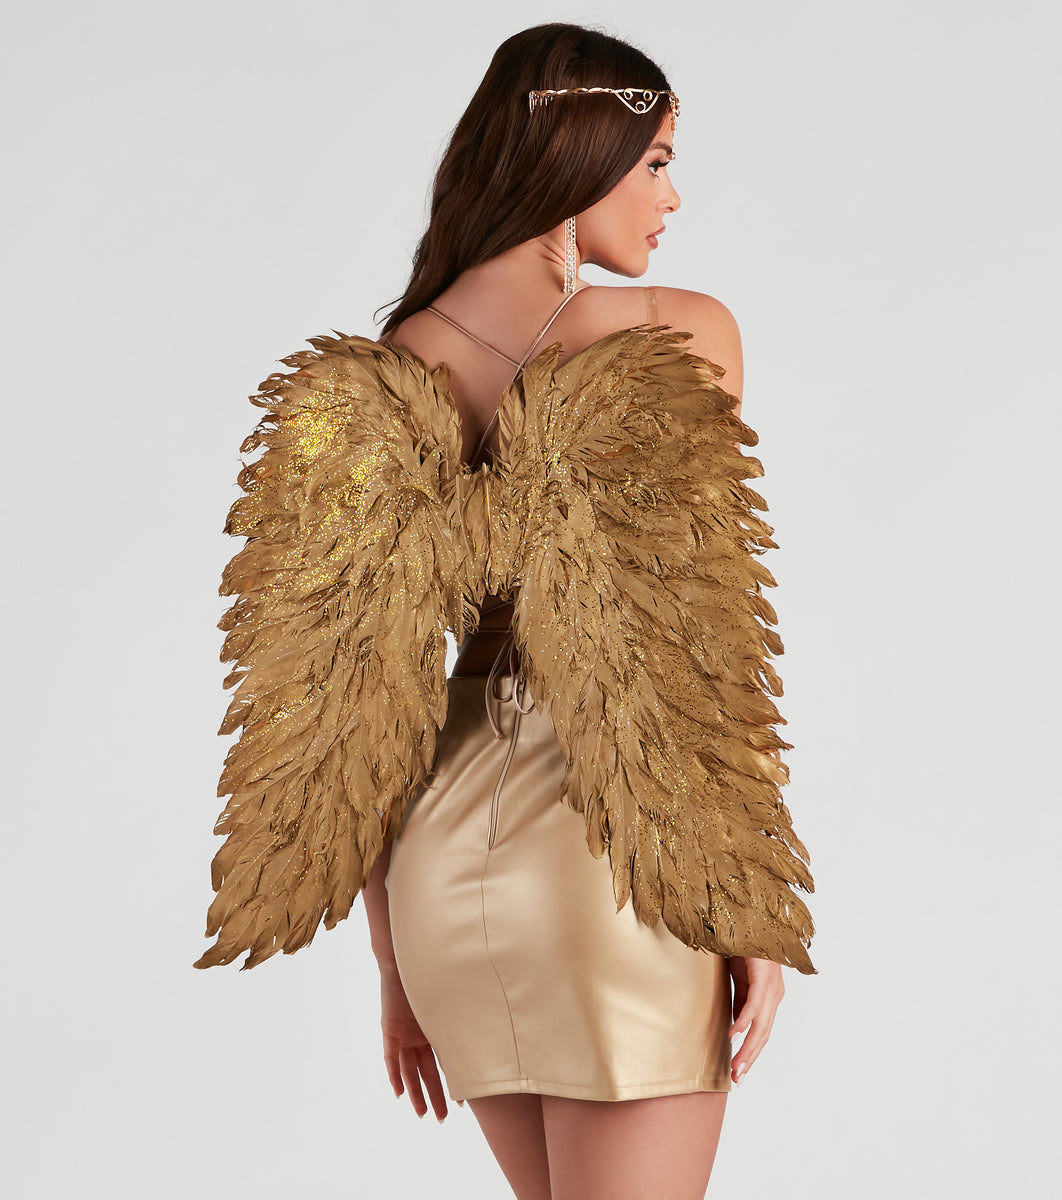  Rubie's Adult Gold Costume Wings, As Shown, One Size :  Clothing, Shoes & Jewelry